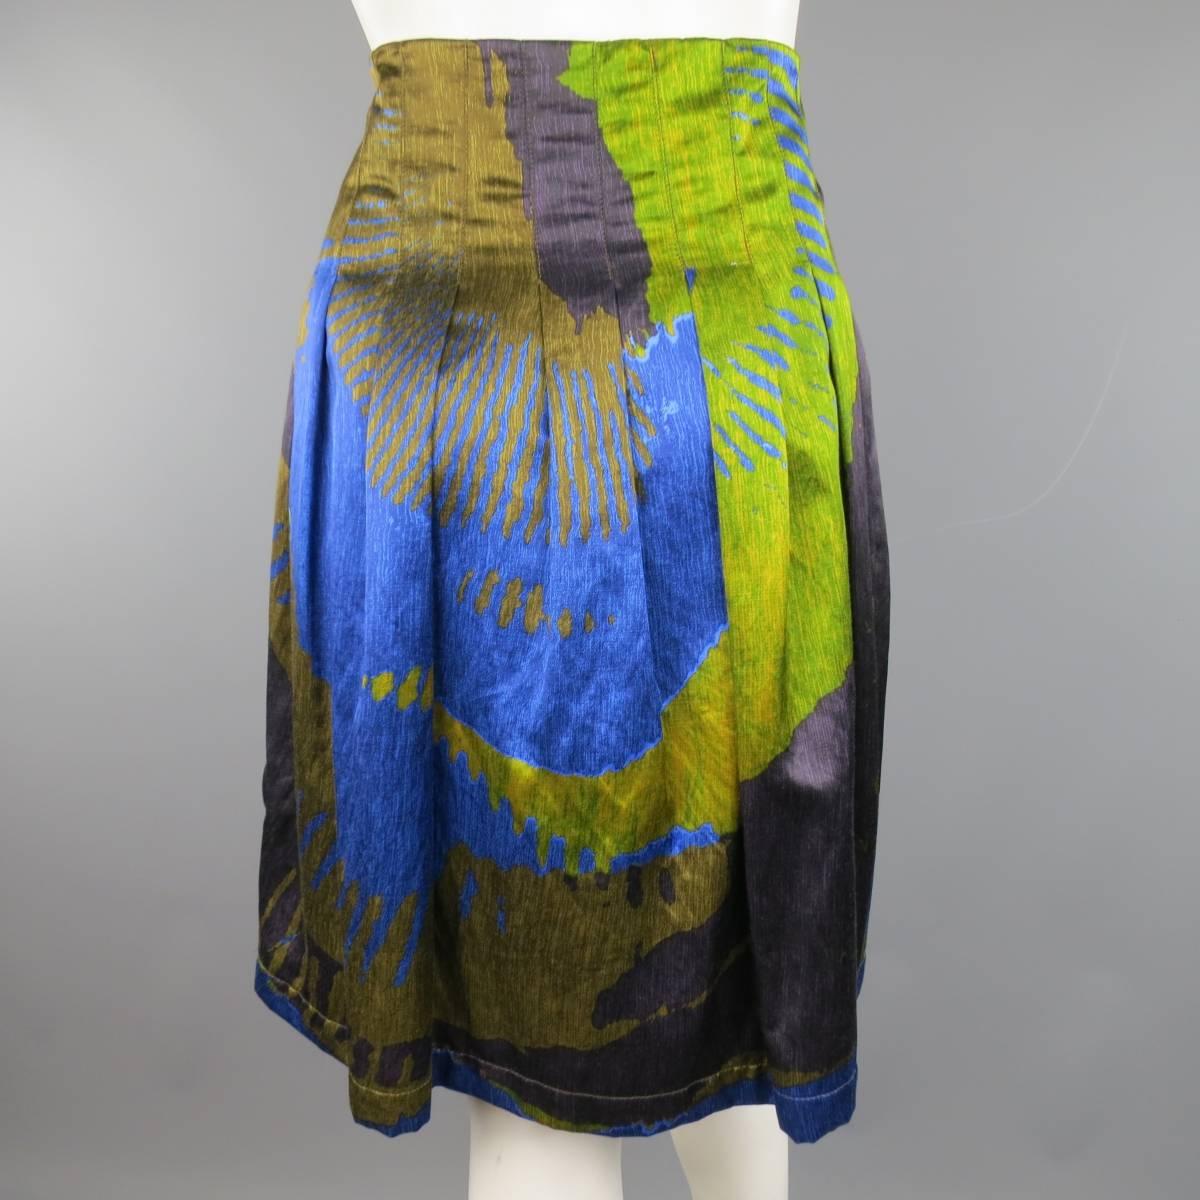 Women's ETRO Skirt - Size 4 - Green & Blue Abstract Print Satin Pleated A Line Skirt